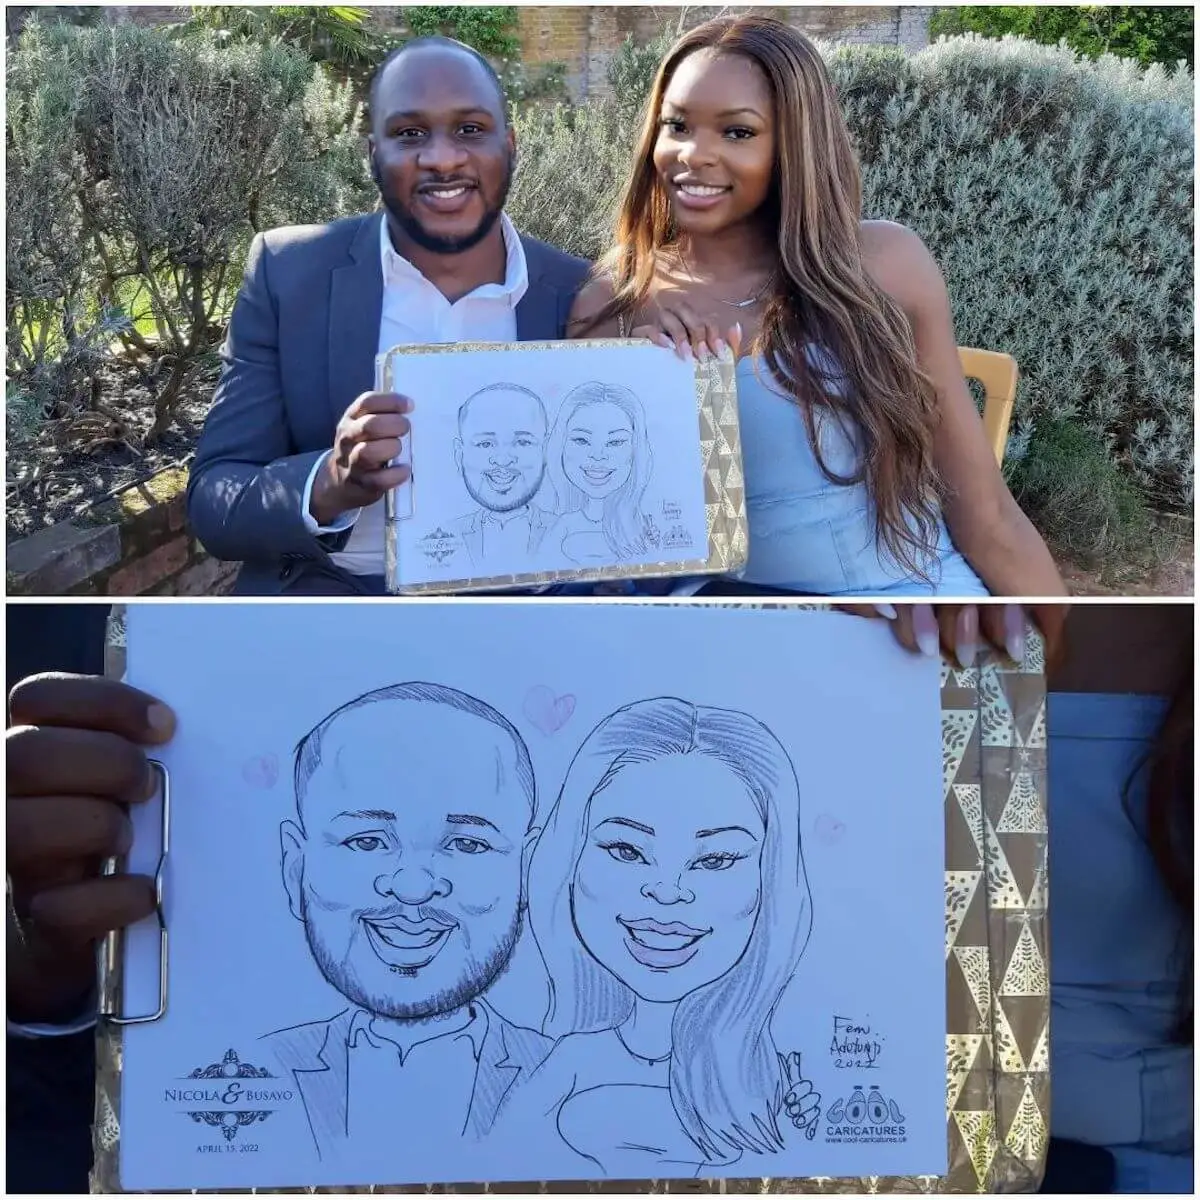 Image of couple at wedding holding their caricature sketch of themselves